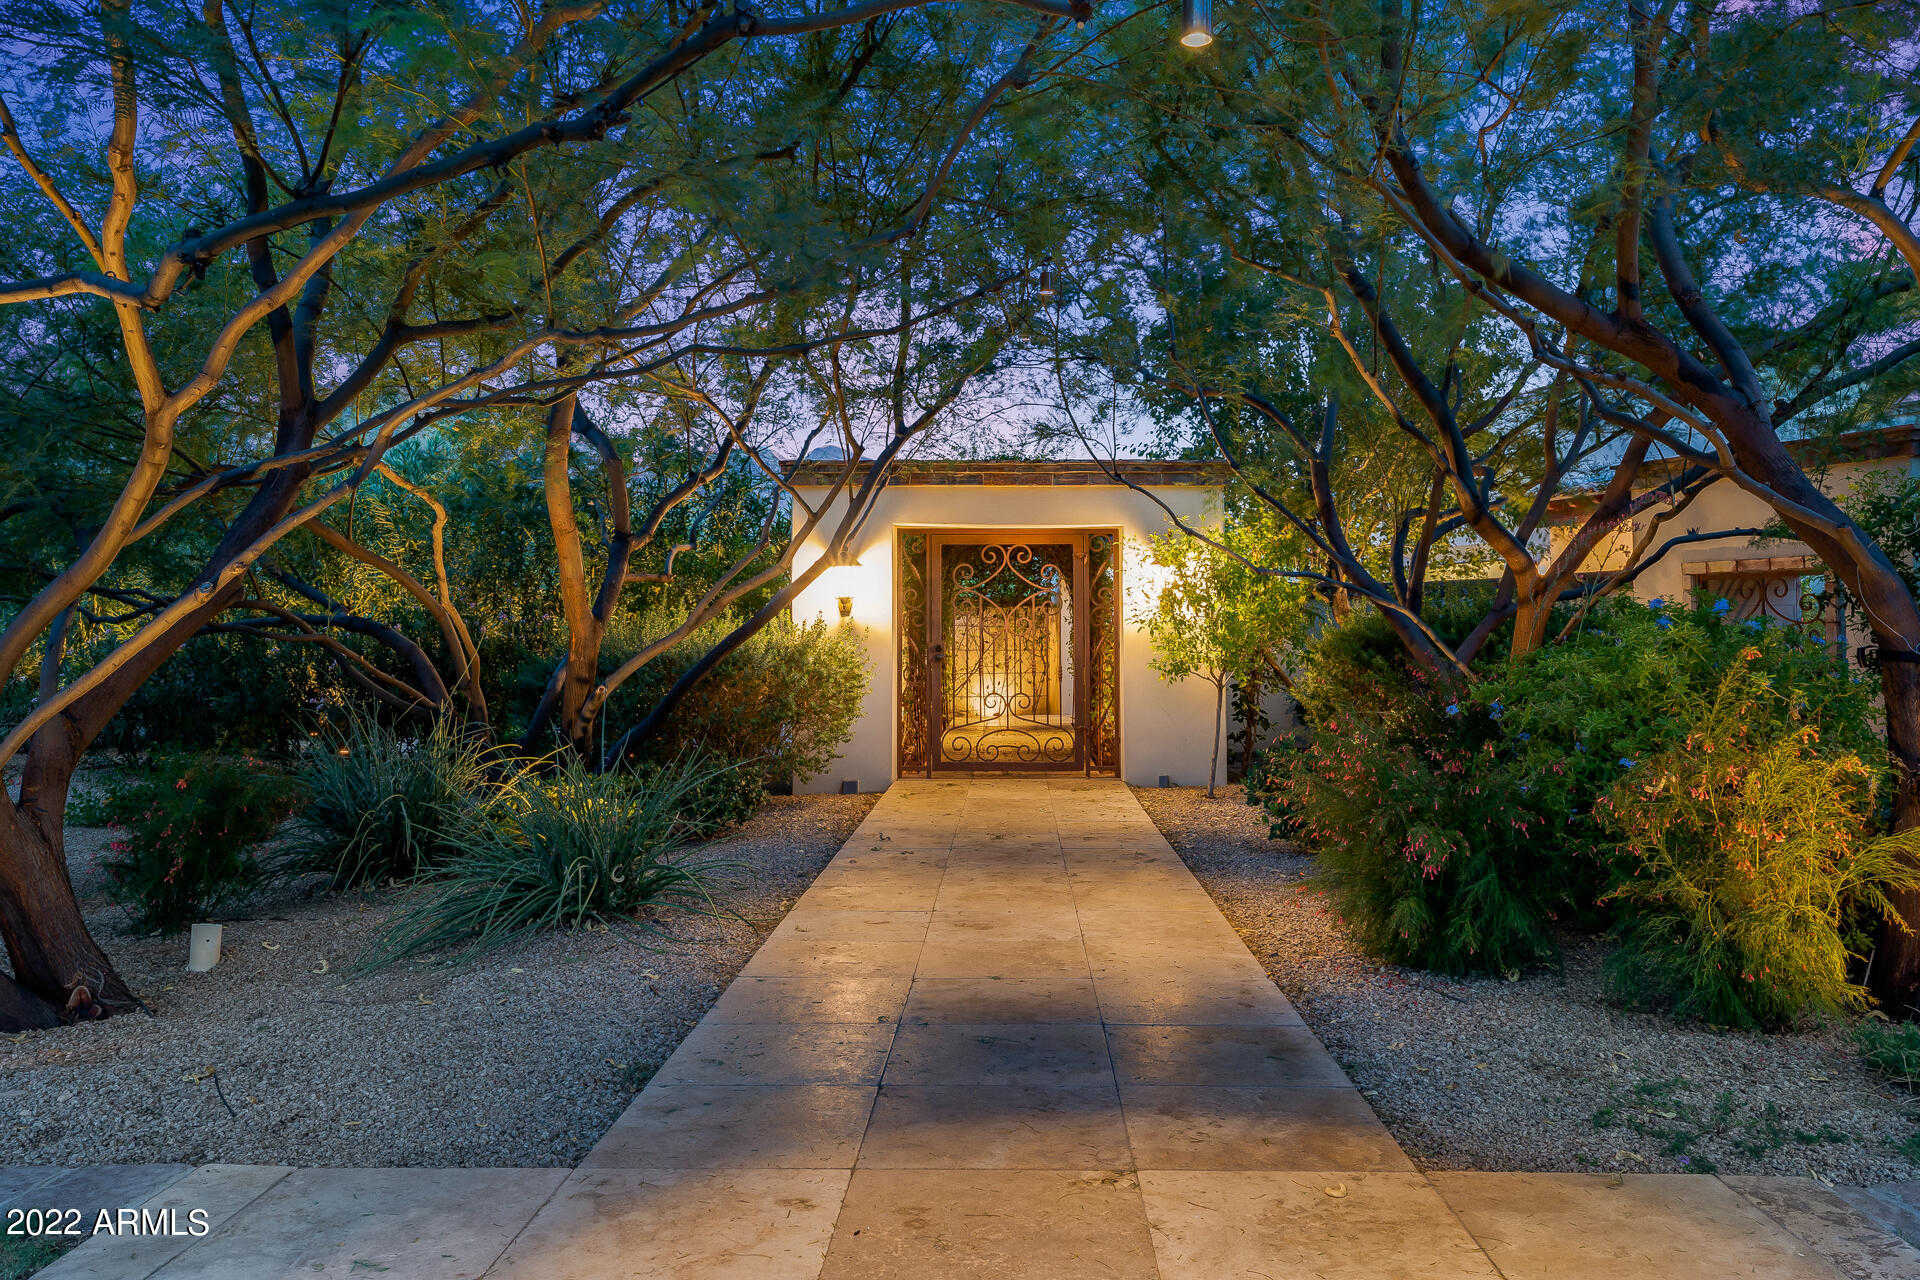 $4,200,000 - 4Br/5Ba - Home for Sale in Camelhead Estates, Paradise Valley